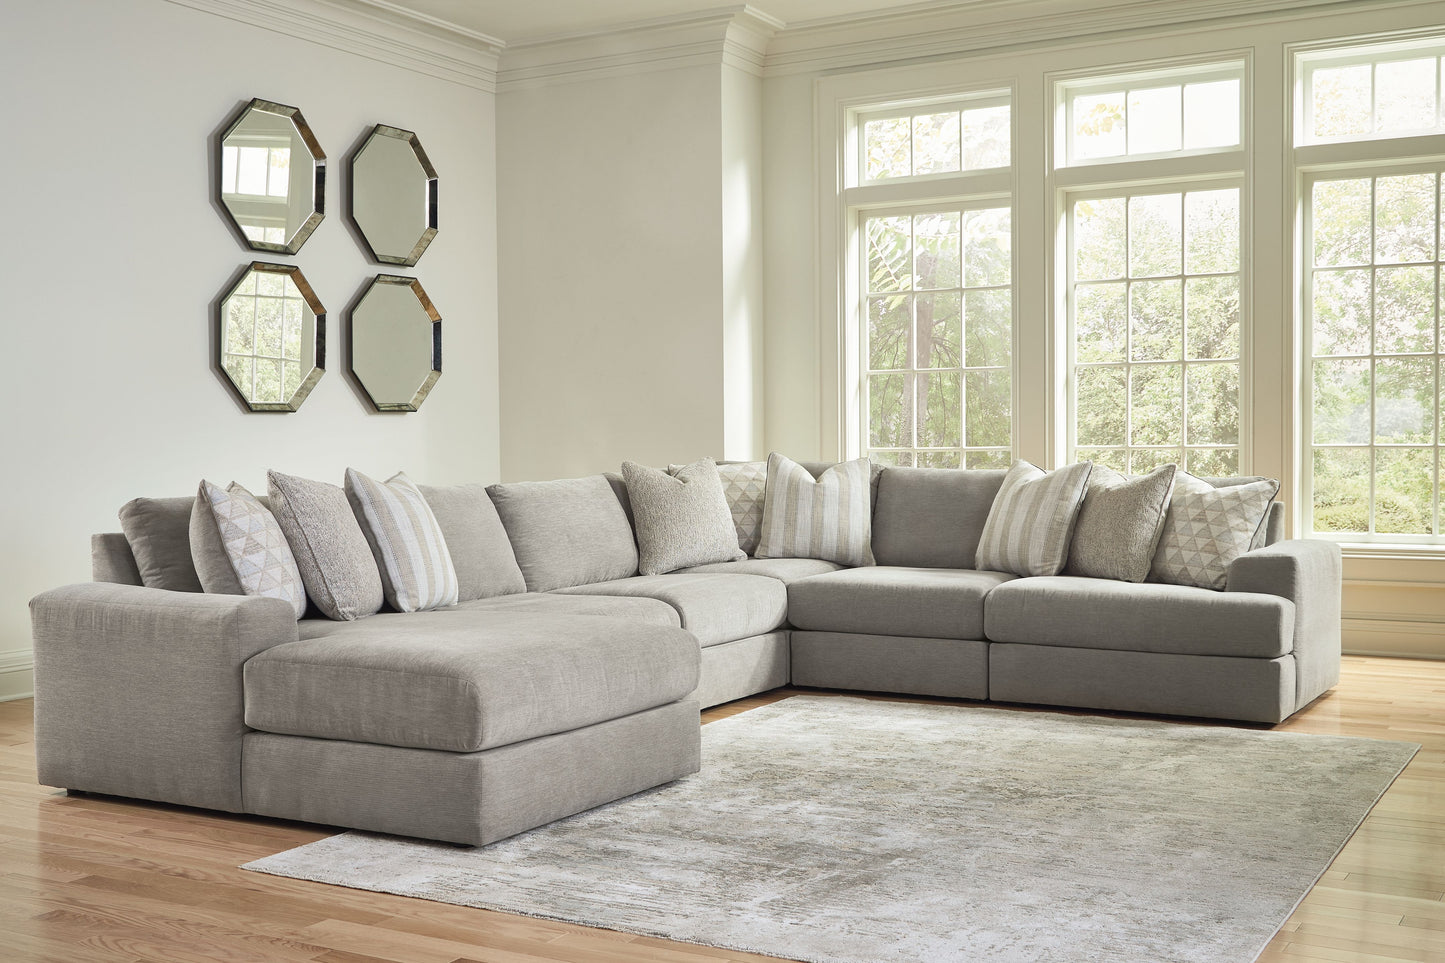 Avaliyah - Ash - 7 Pc. - 6-Piece Sectional With Laf Corner Chaise, Ottoman